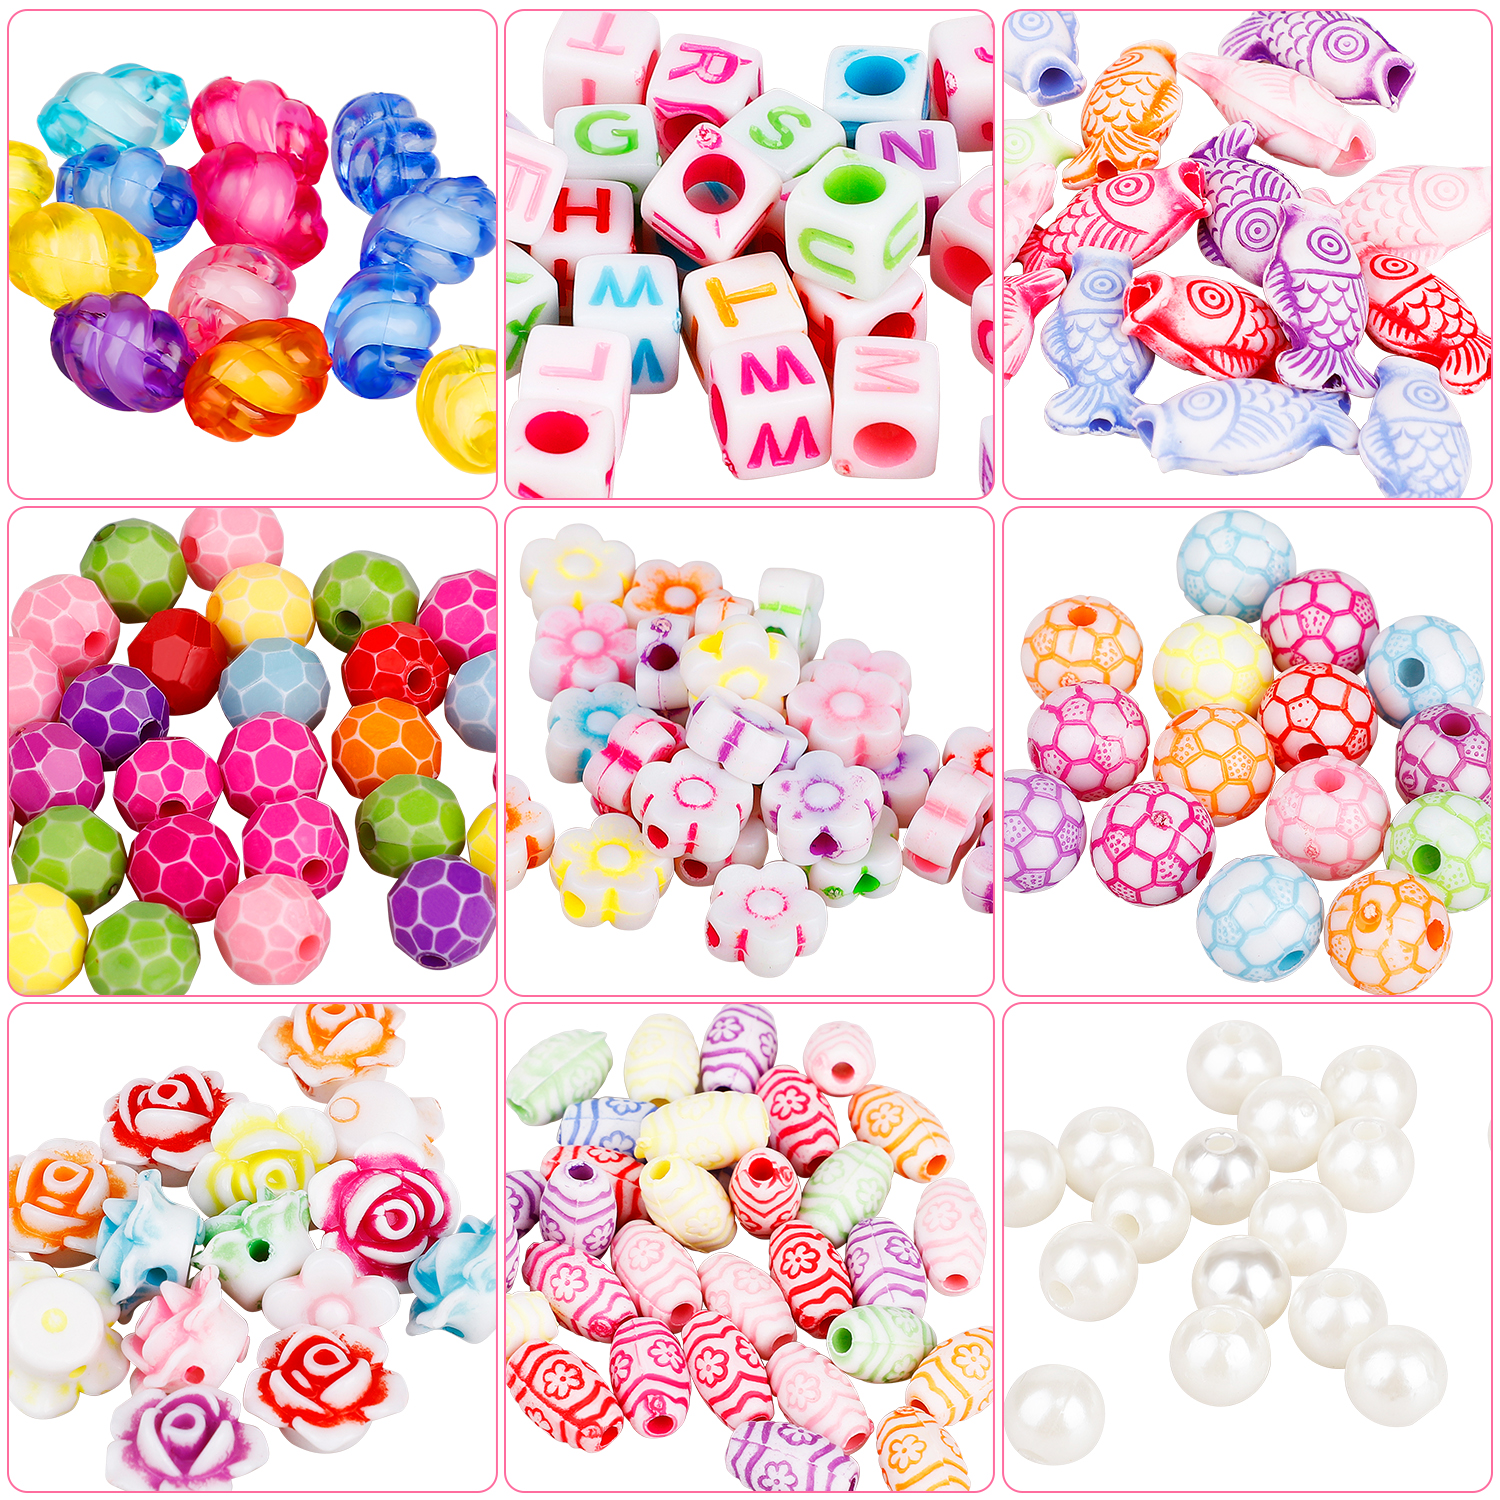 32 Styles Beads Set forJewellery Making Kids &Crafts&Name Bracelets And DIY Necklace Bracelets Letter Alphabet Colorful Acrylic Crafting Beads Kit Box with Accessories - image 3 of 9